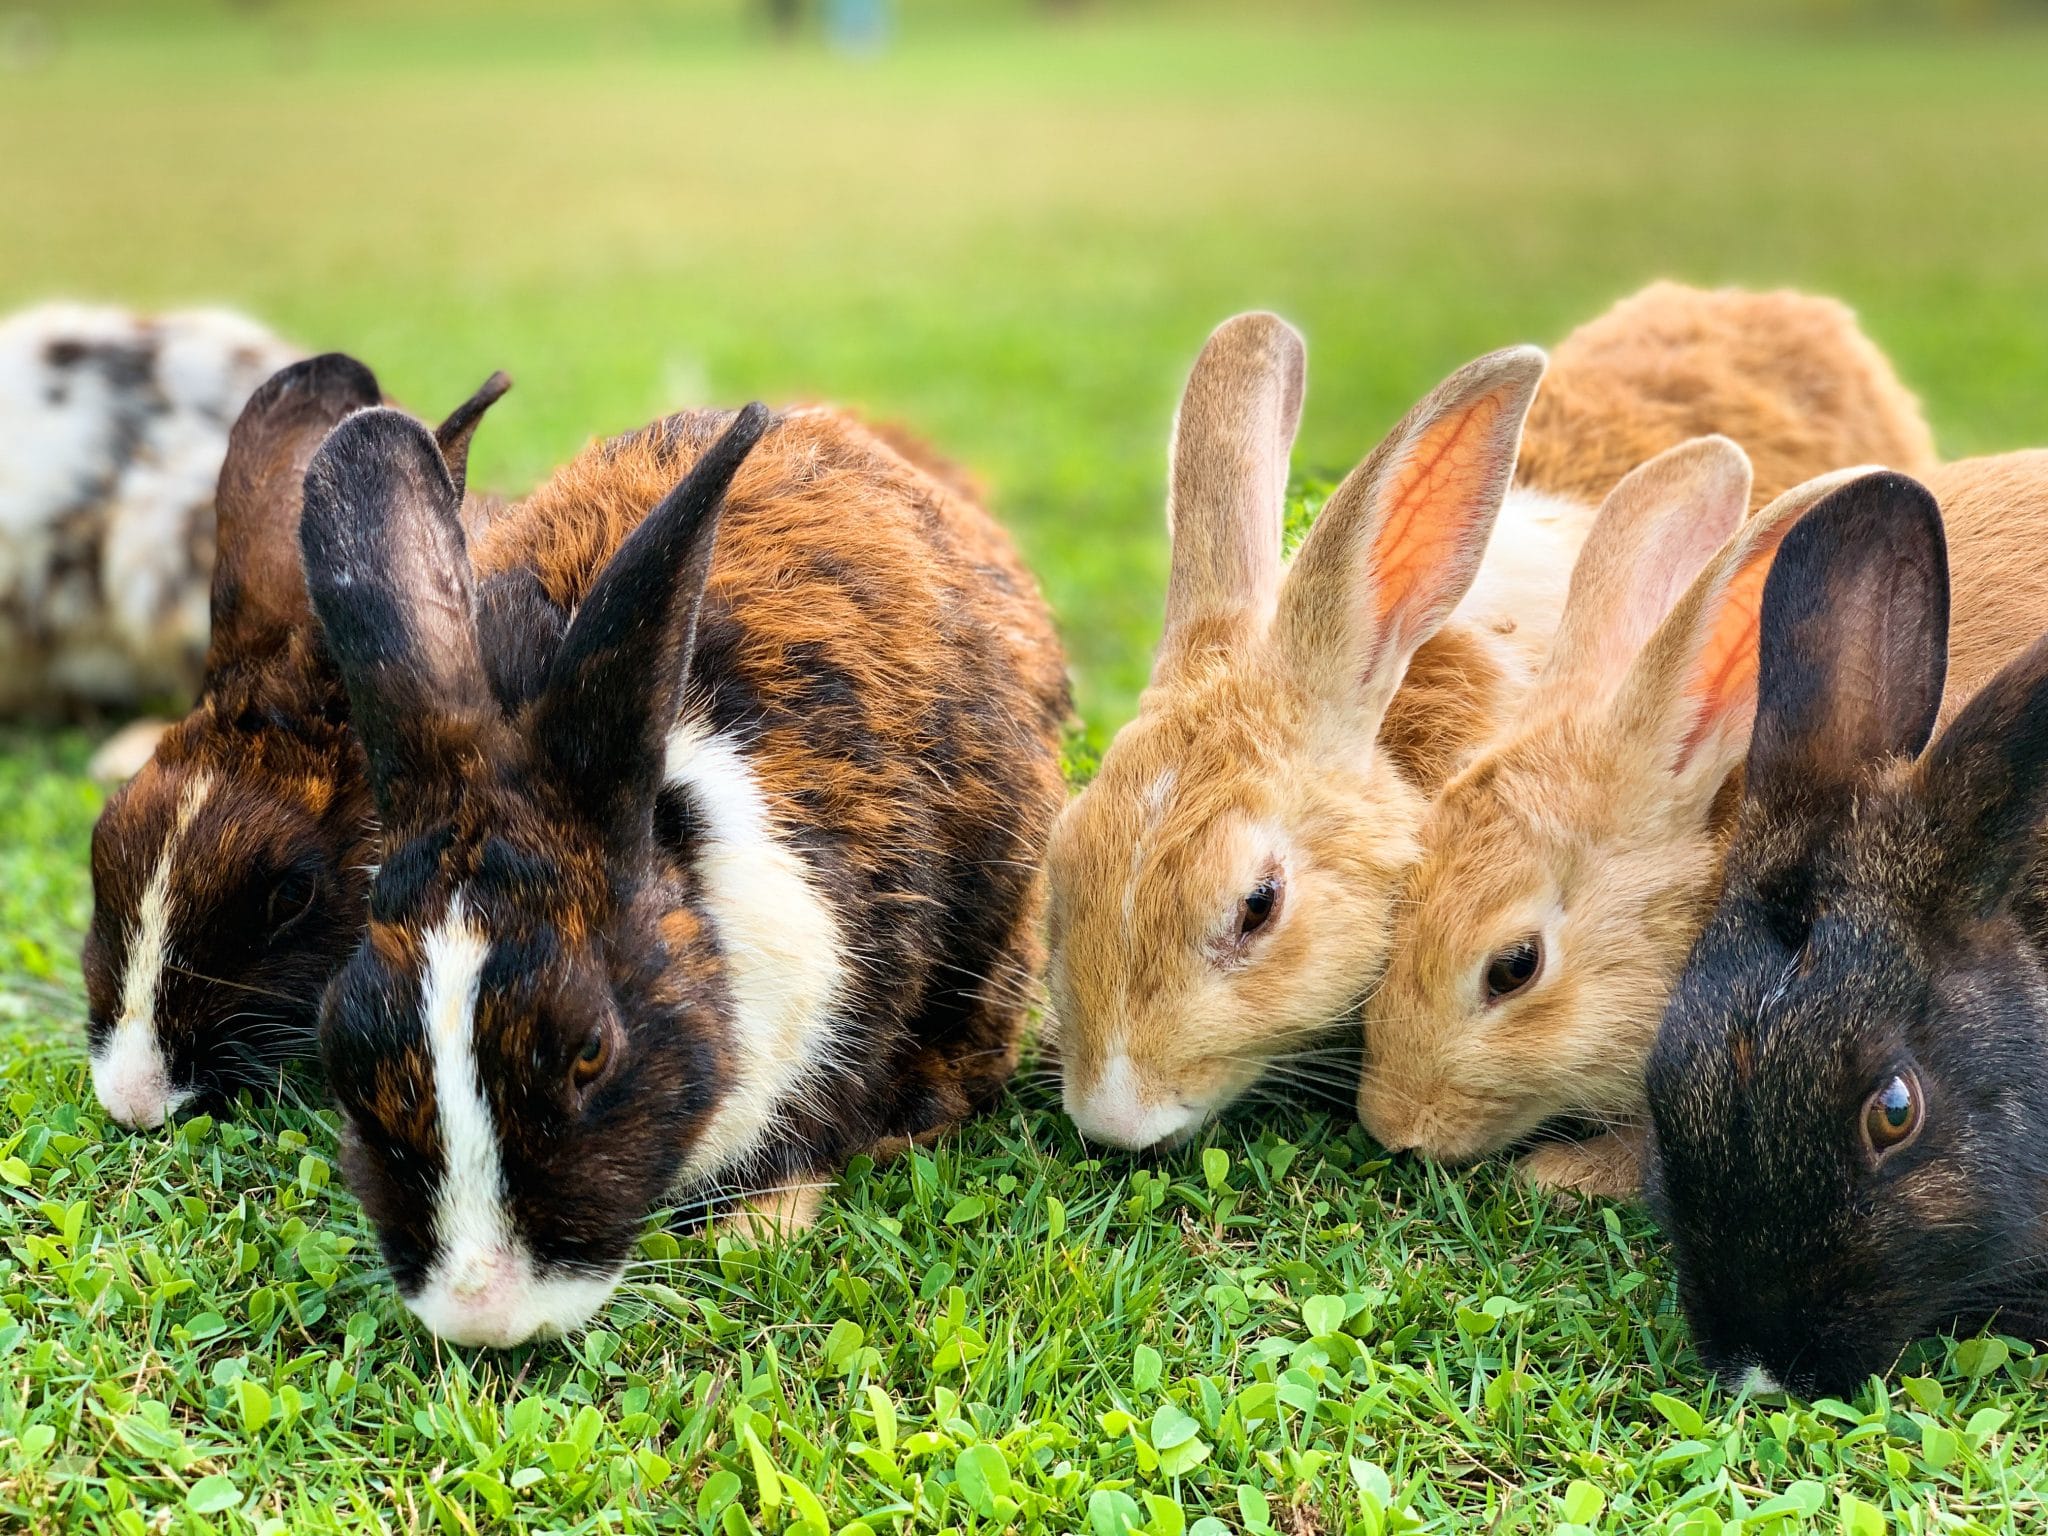 a group of bunnies nibbling on grass